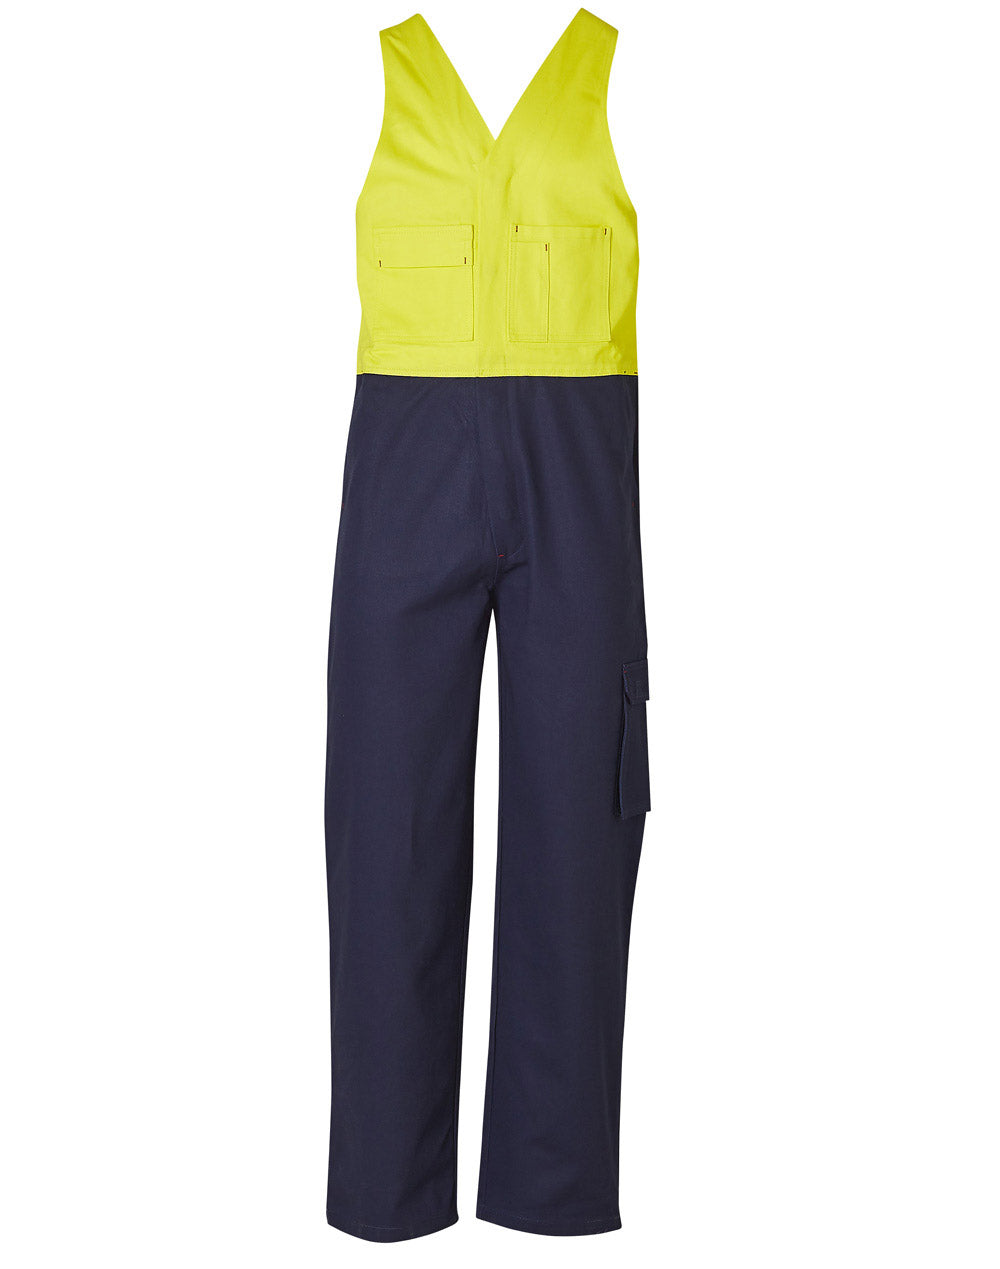 Hi Vis Drill A/b Overalls - made by AIW